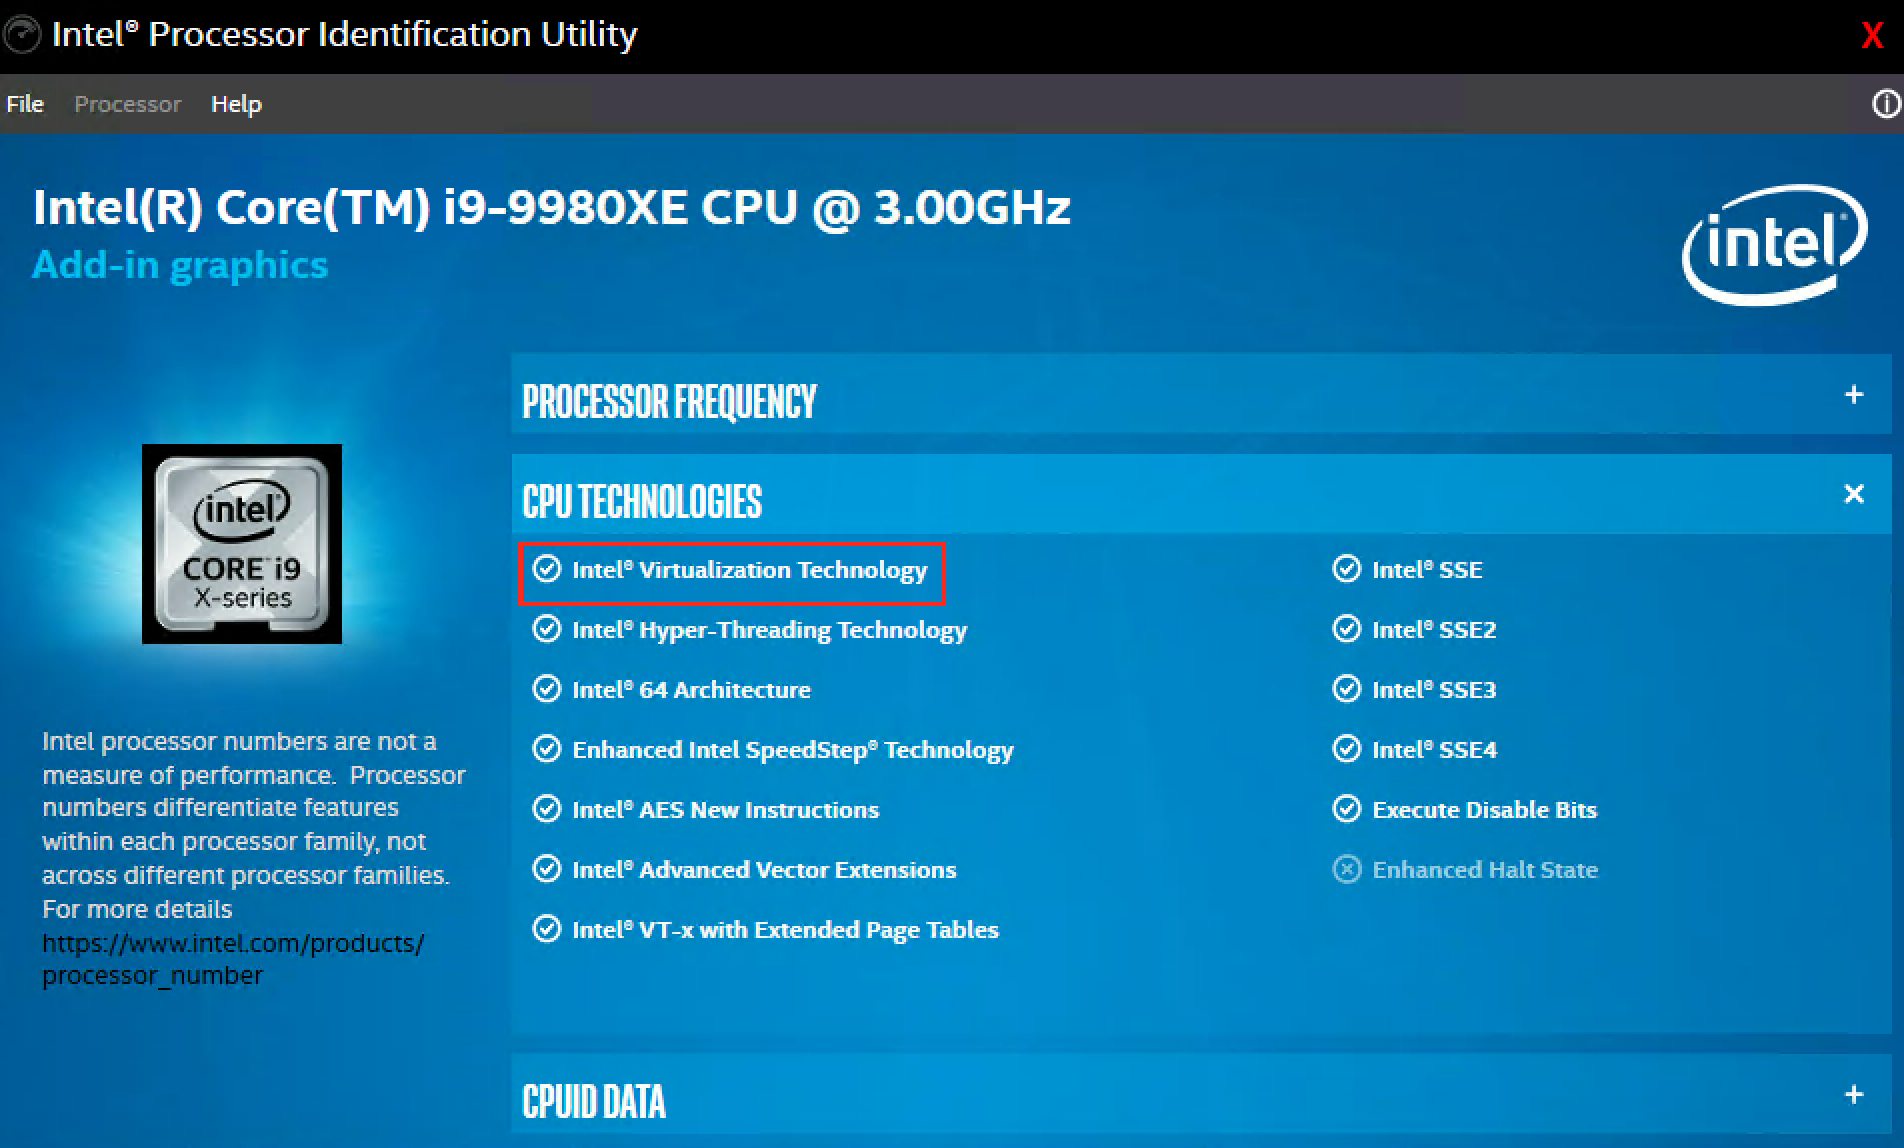 what does the intel processor identification utility do